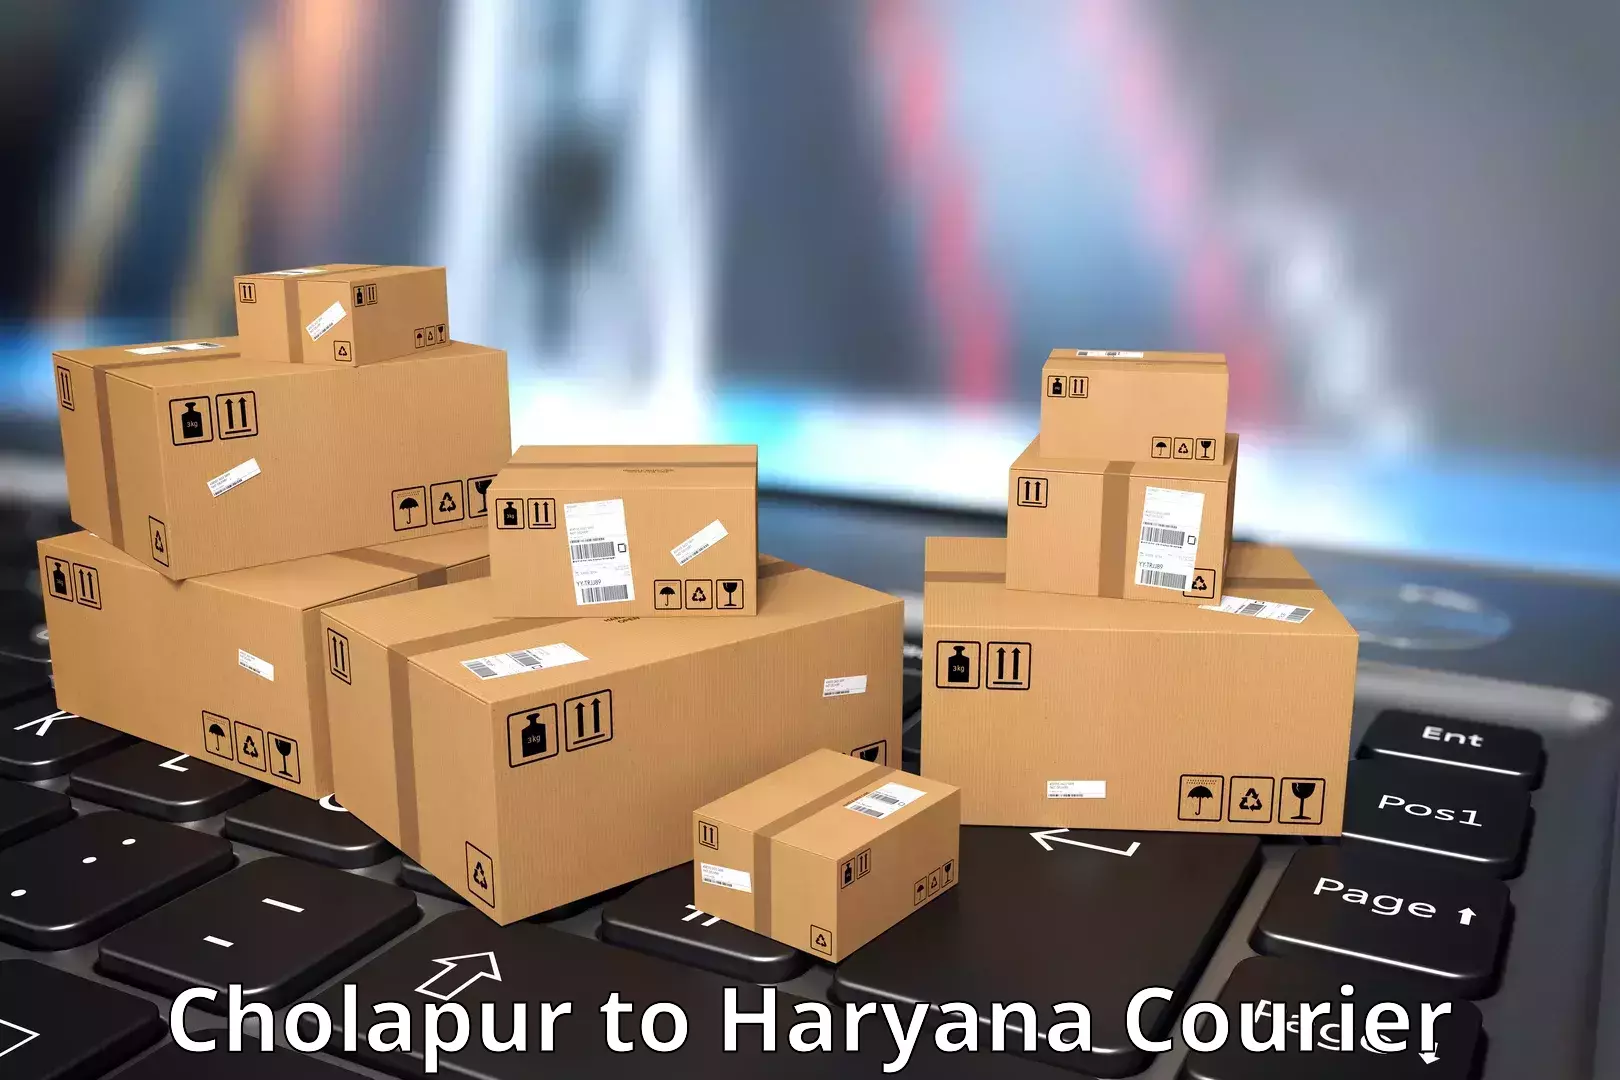 Next-day delivery options Cholapur to Gurgaon